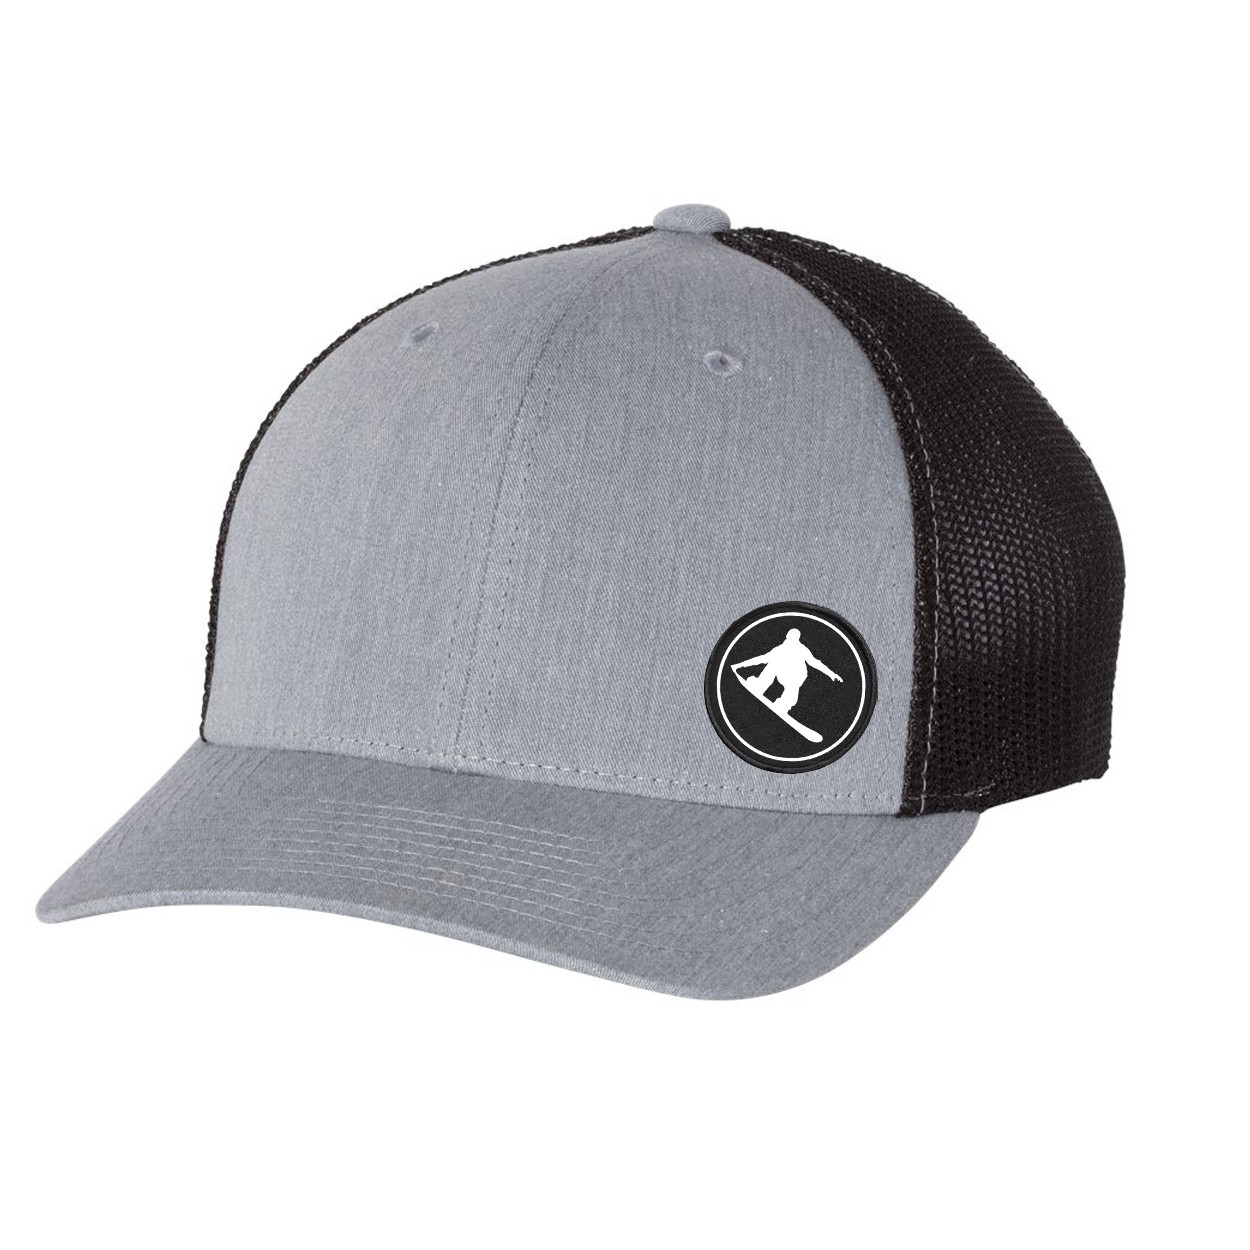 Ride Snowboard Icon Logo Night Out Woven Circle Patch Snapback Trucker Hat Heather Gray/Black (White Logo)